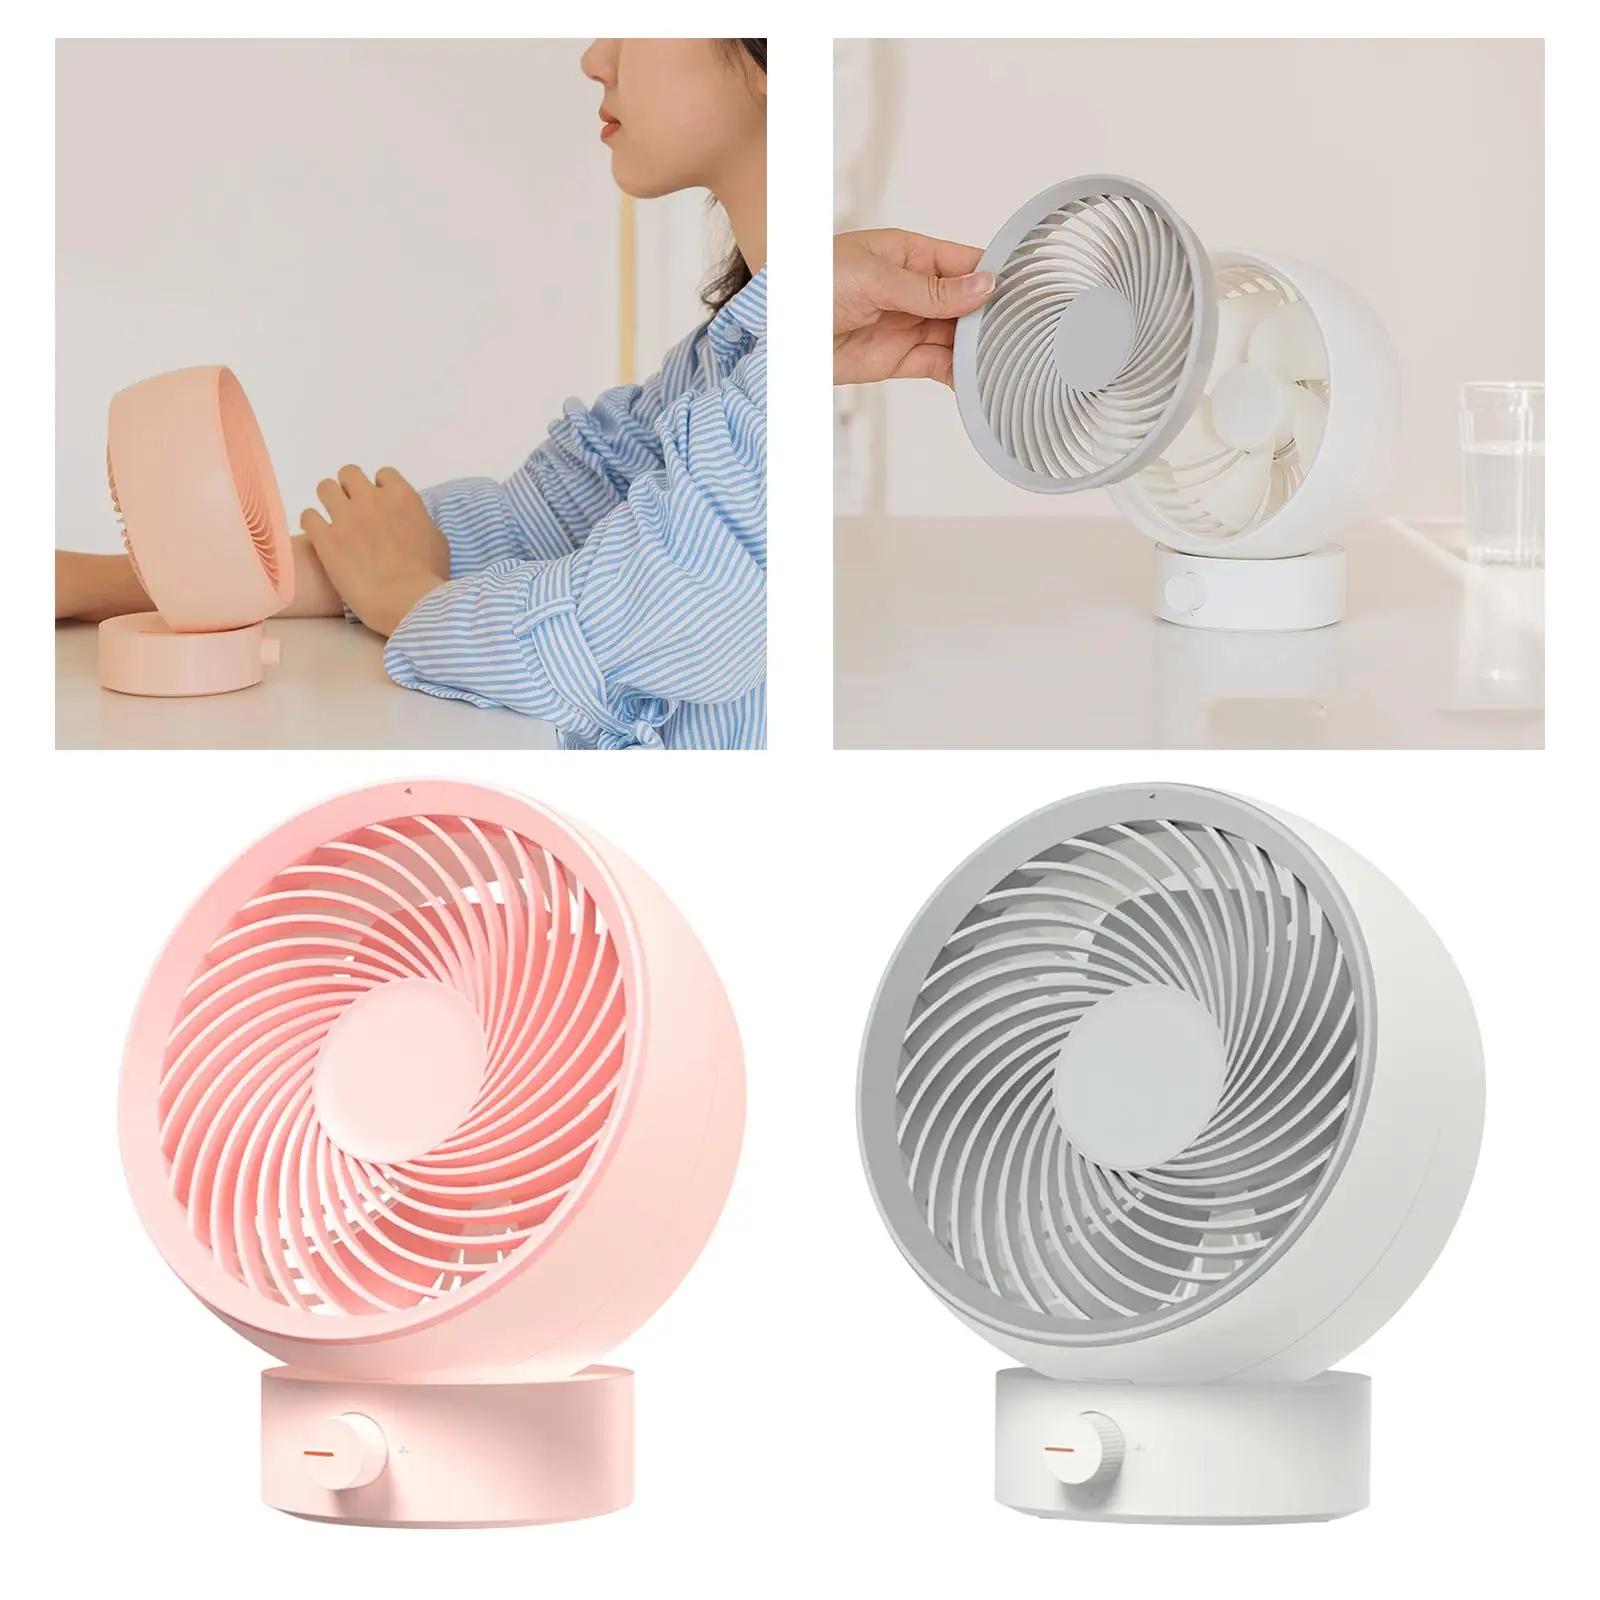 Powerful USB Small Desk Table Fan Strong Wind Circulator Bed Cooling Fan